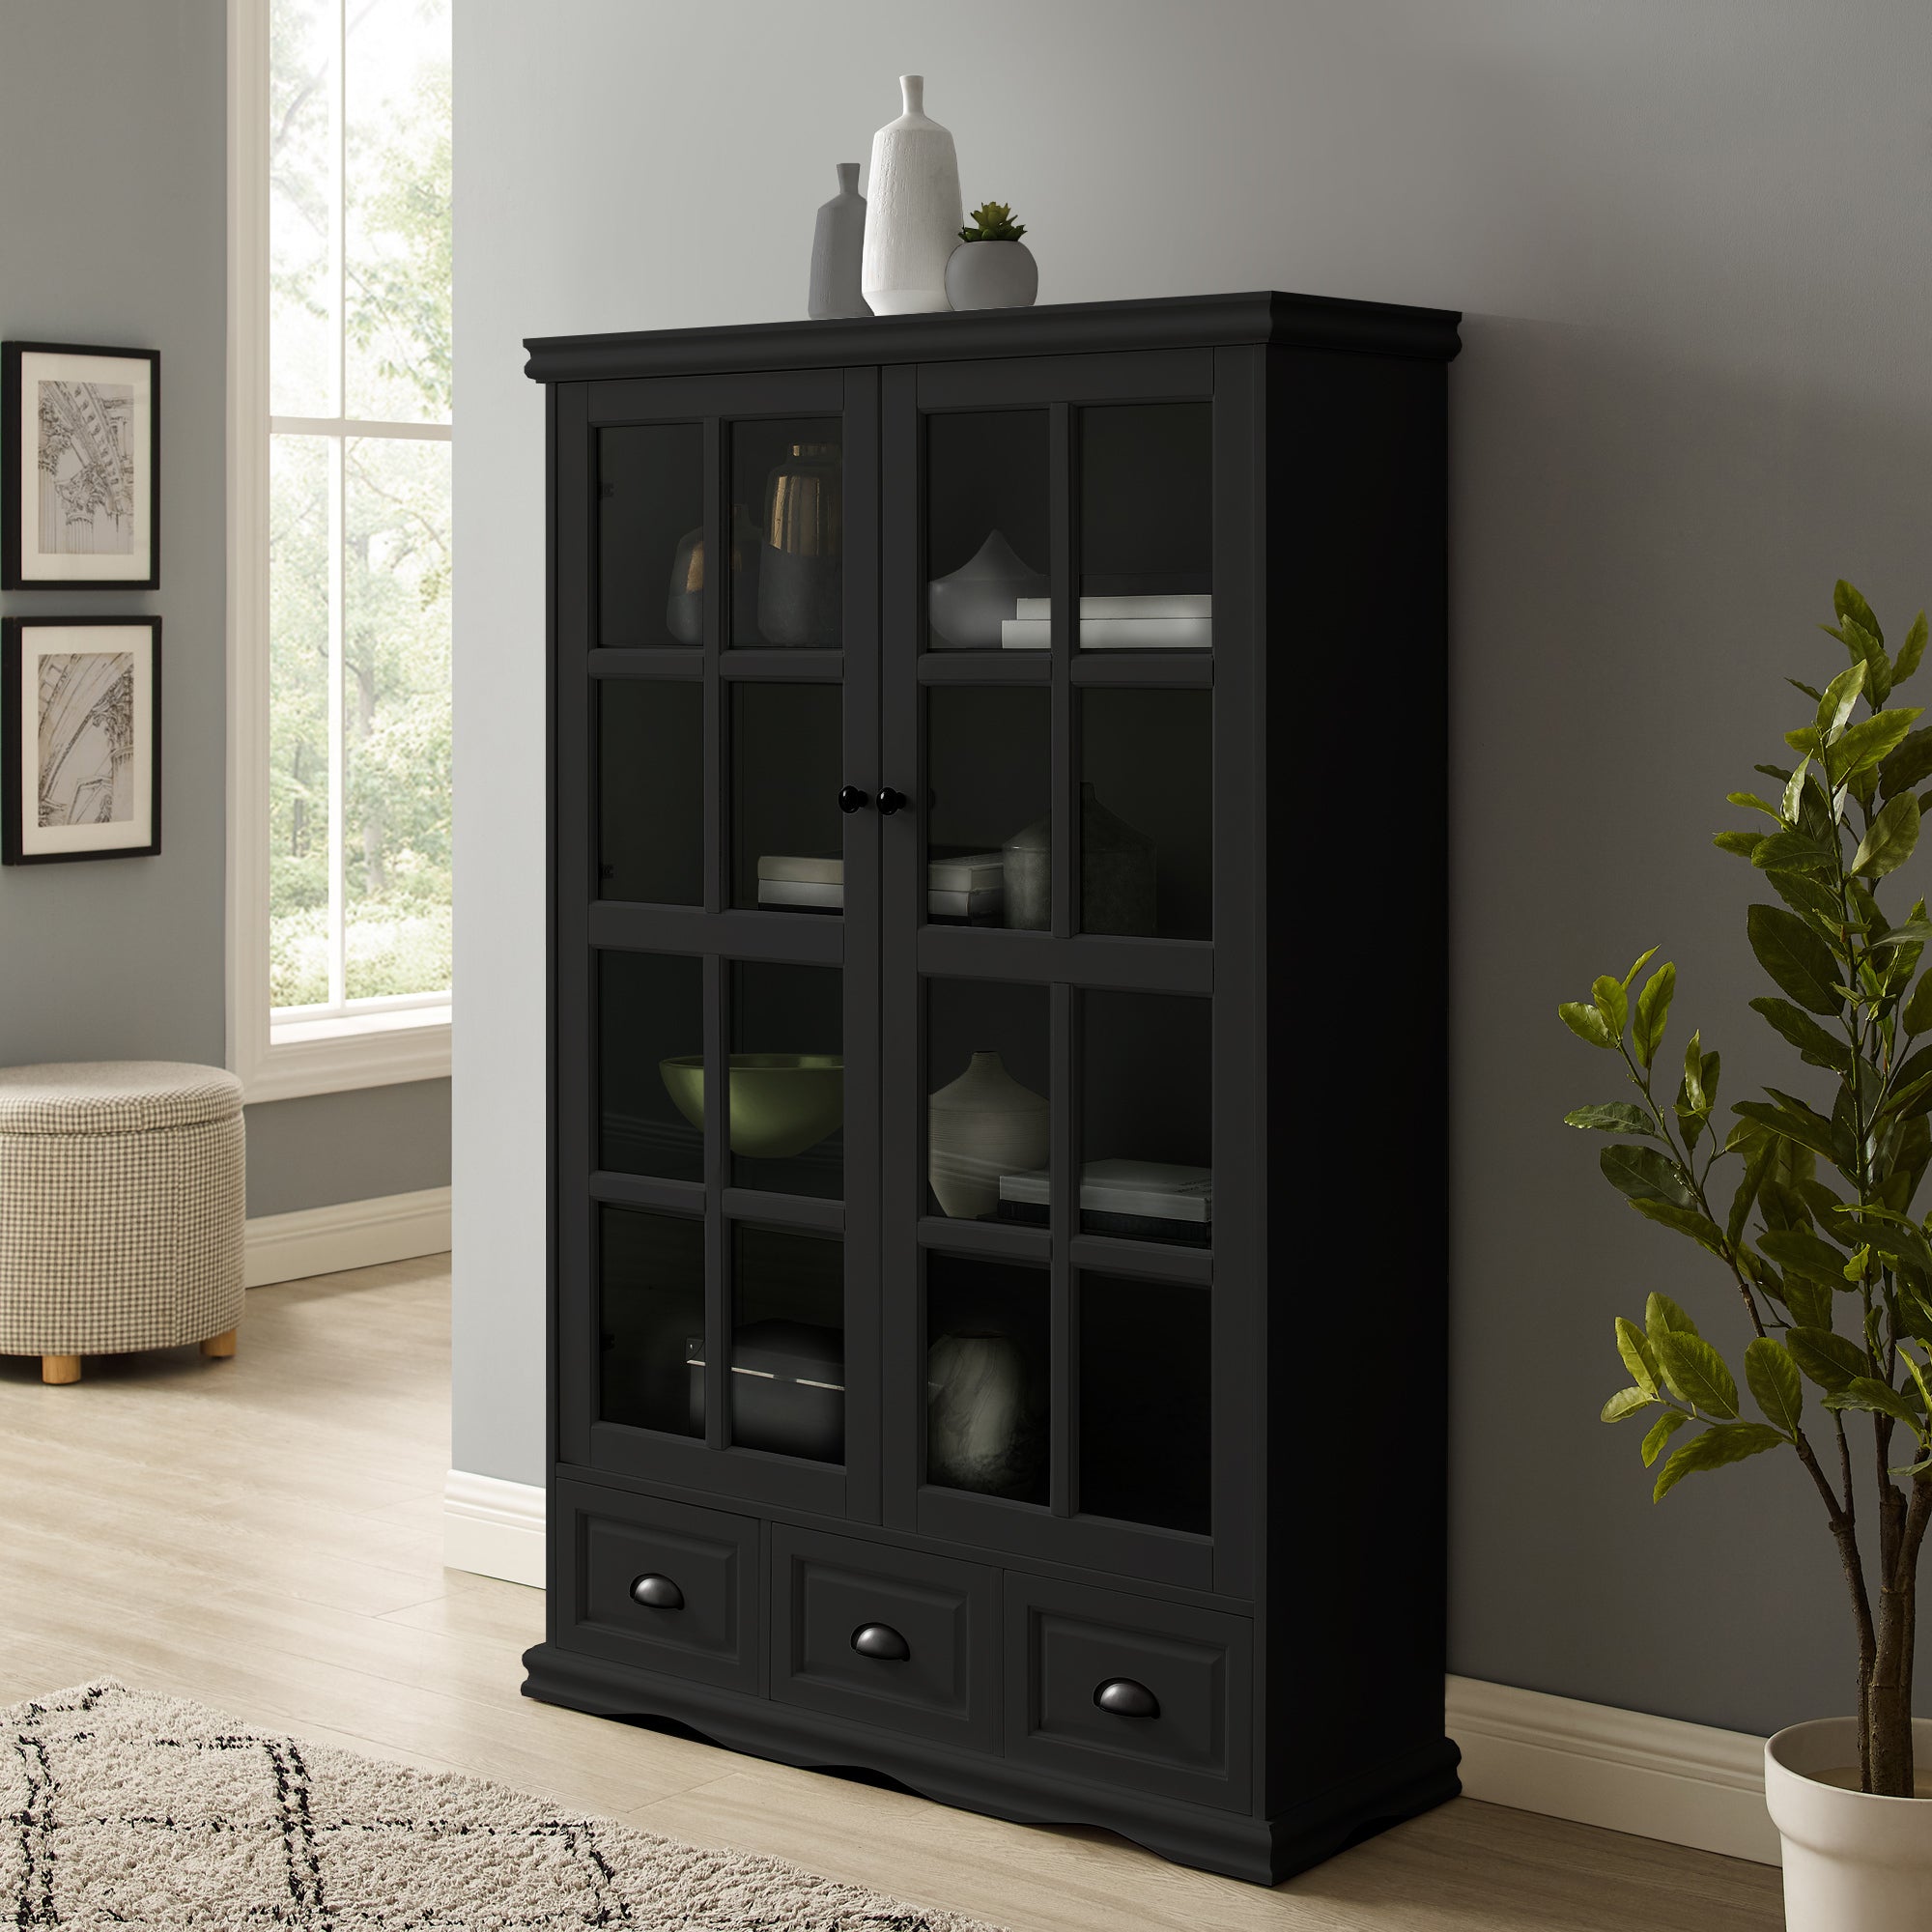 Modern China Cabinet with Tempered Glass Doors, Adjustable Shelf Display and Triple Drawers (Black)